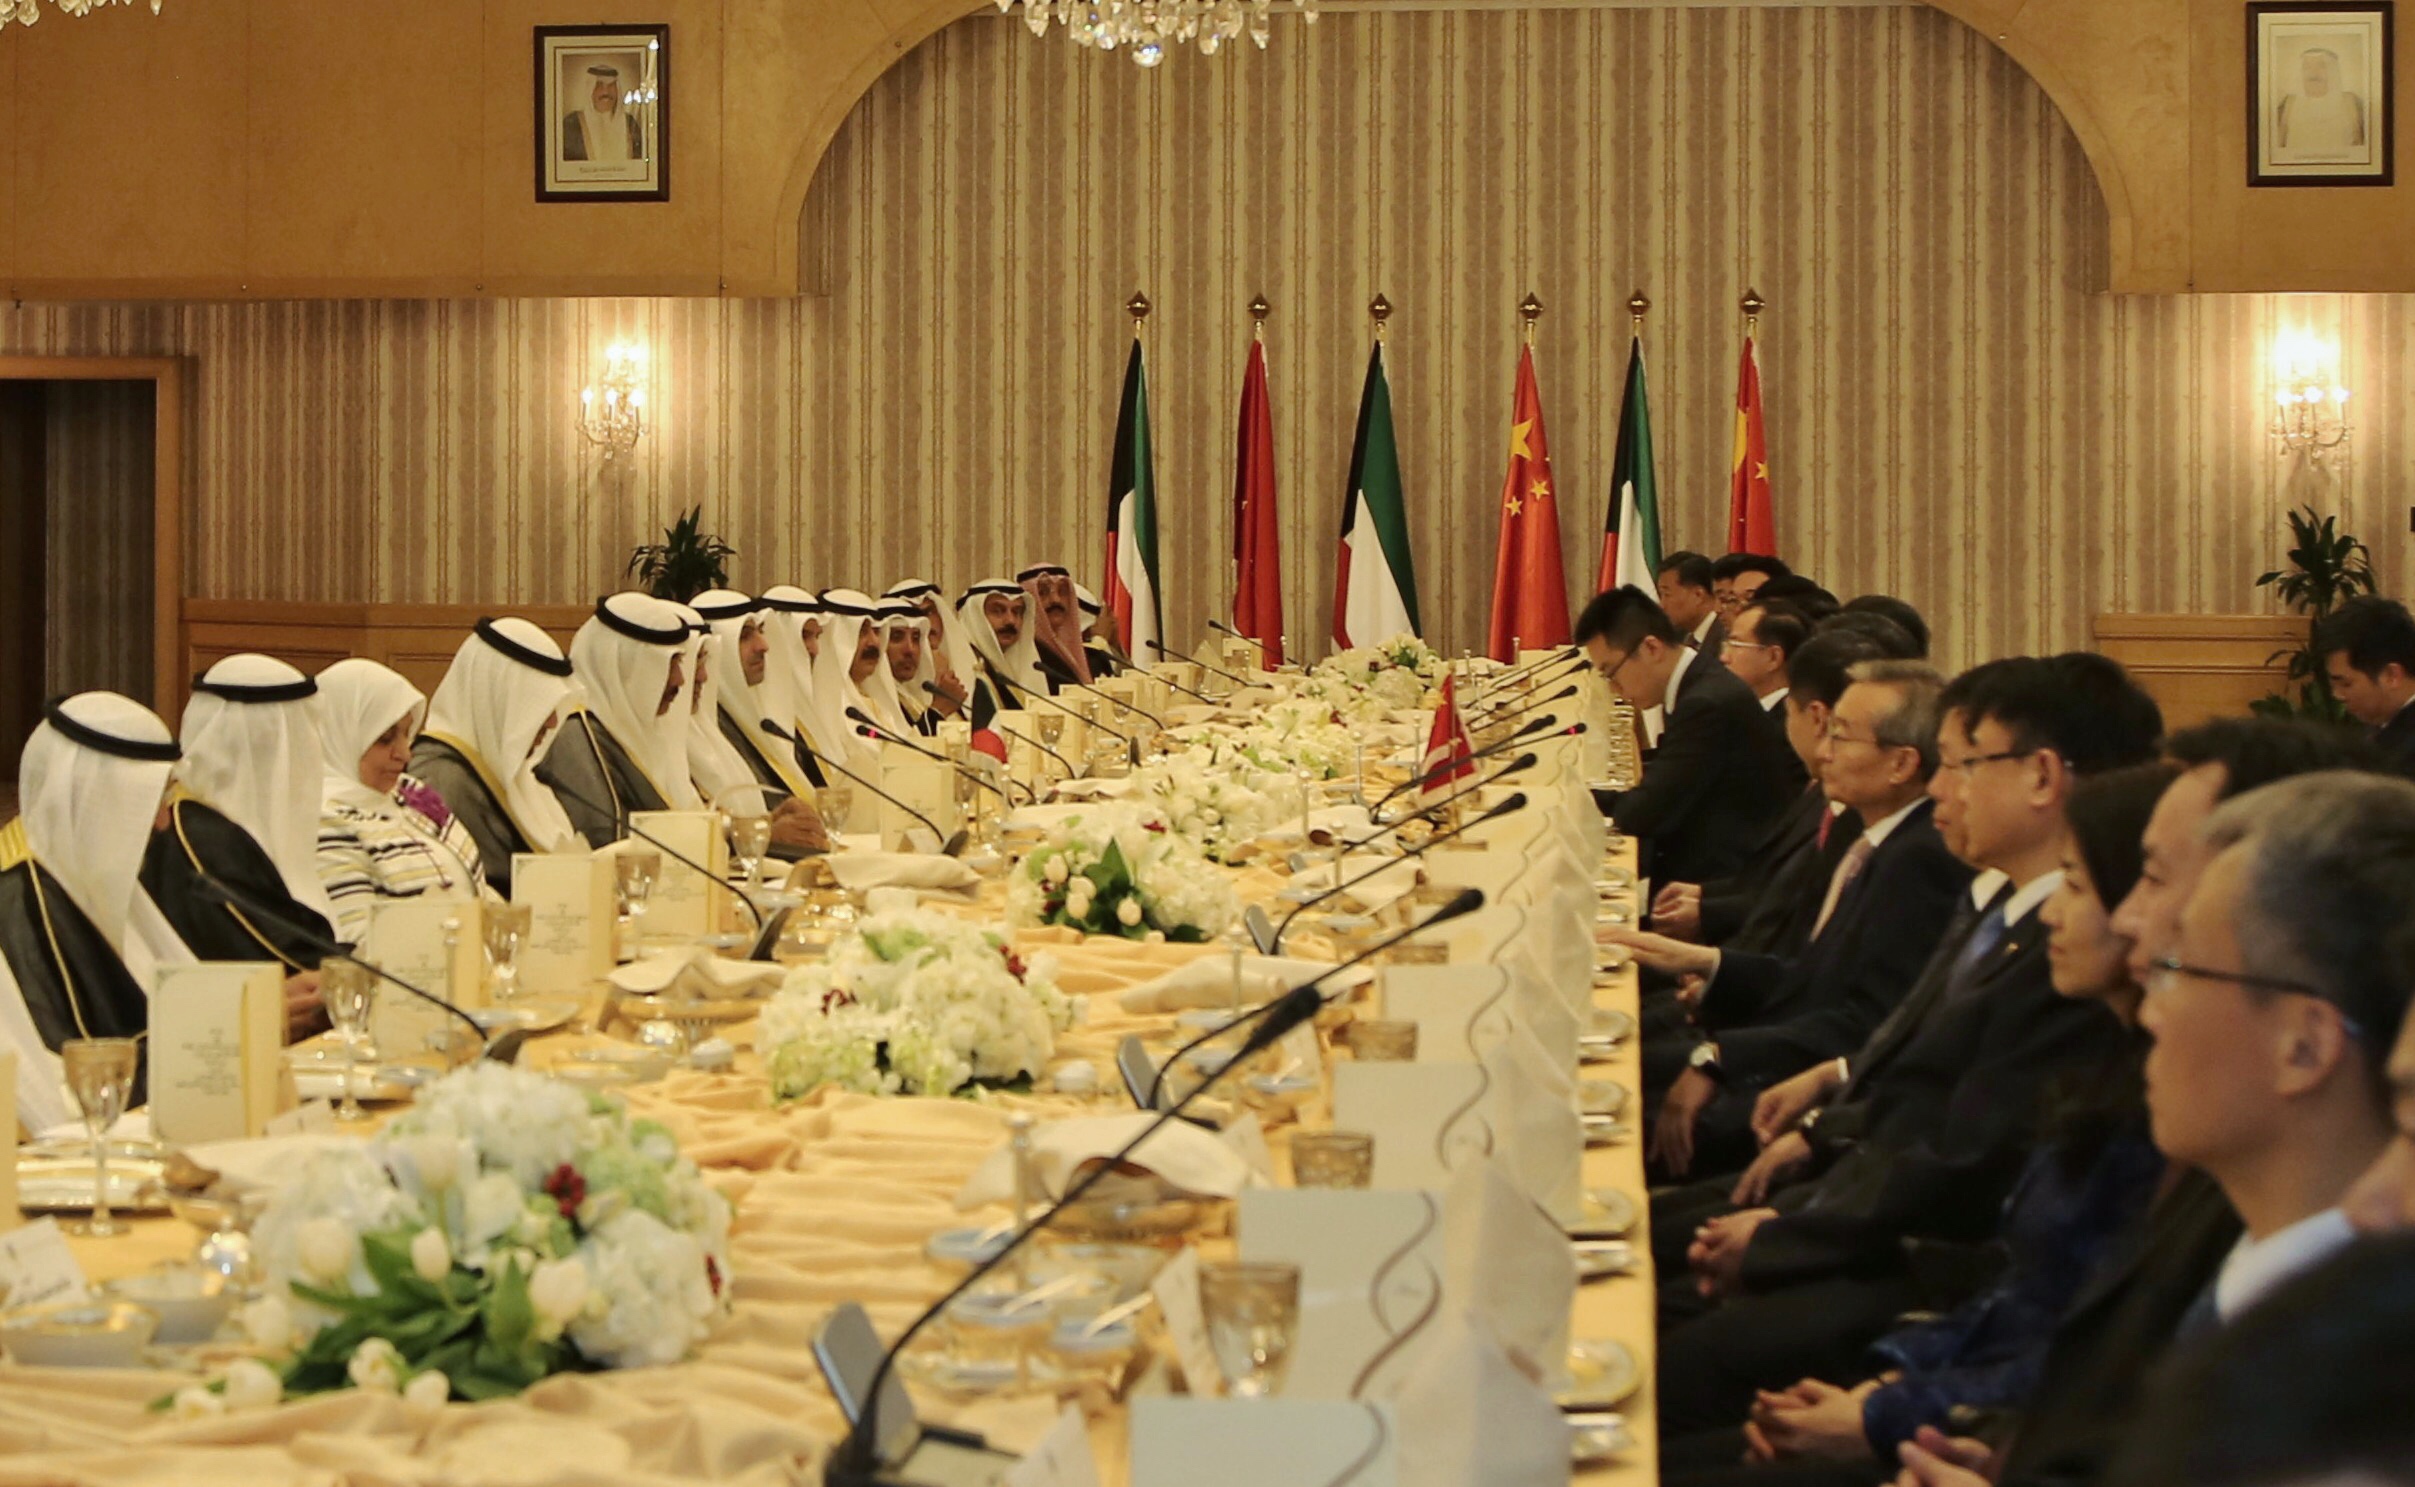 First Deputy Prime Minister and Foreign Minister Sheikh Sabah Al-Khaled Al-Hamad Al-Sabah holds banquet for Vice Premier of the State Council of the People's Republic of China Zhang Gaoli